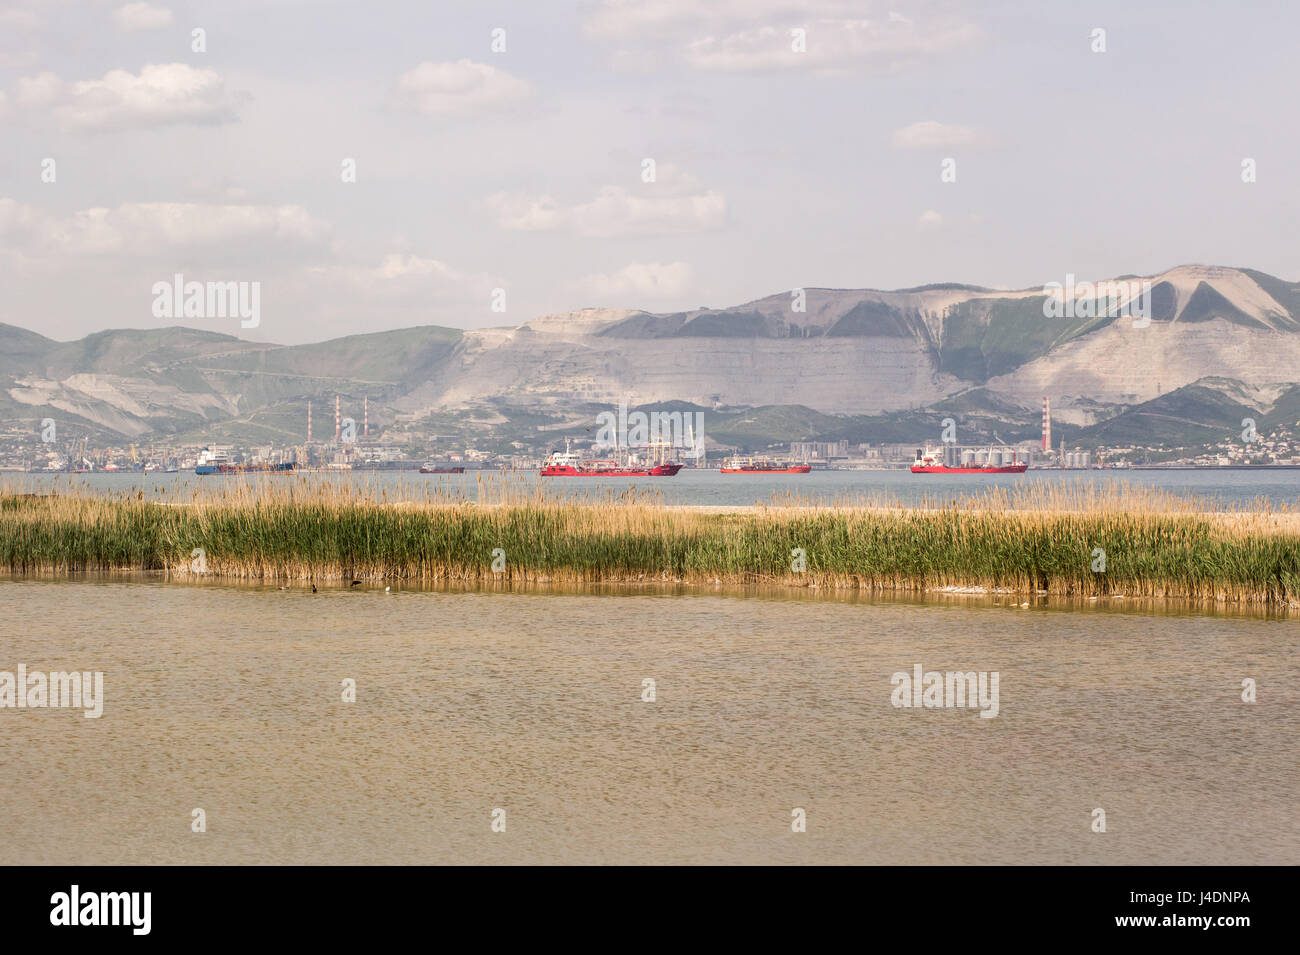 Red and blue cargo ships in the bay of Novorossiysk Stock Photo